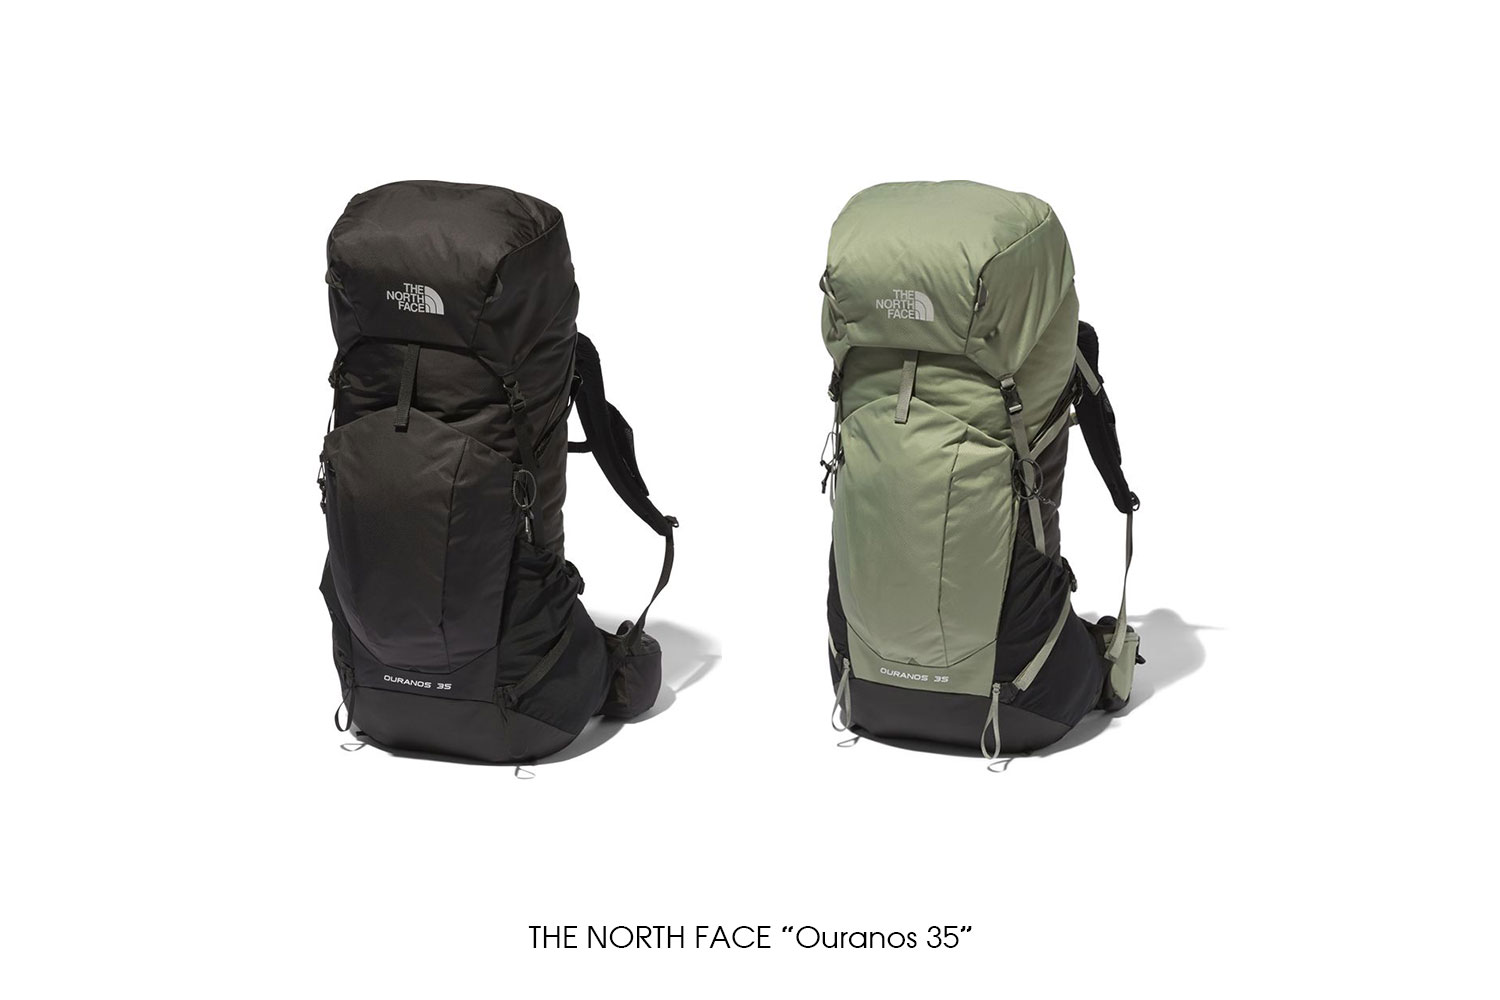 THE NORTH FACE "Ouranos 35"